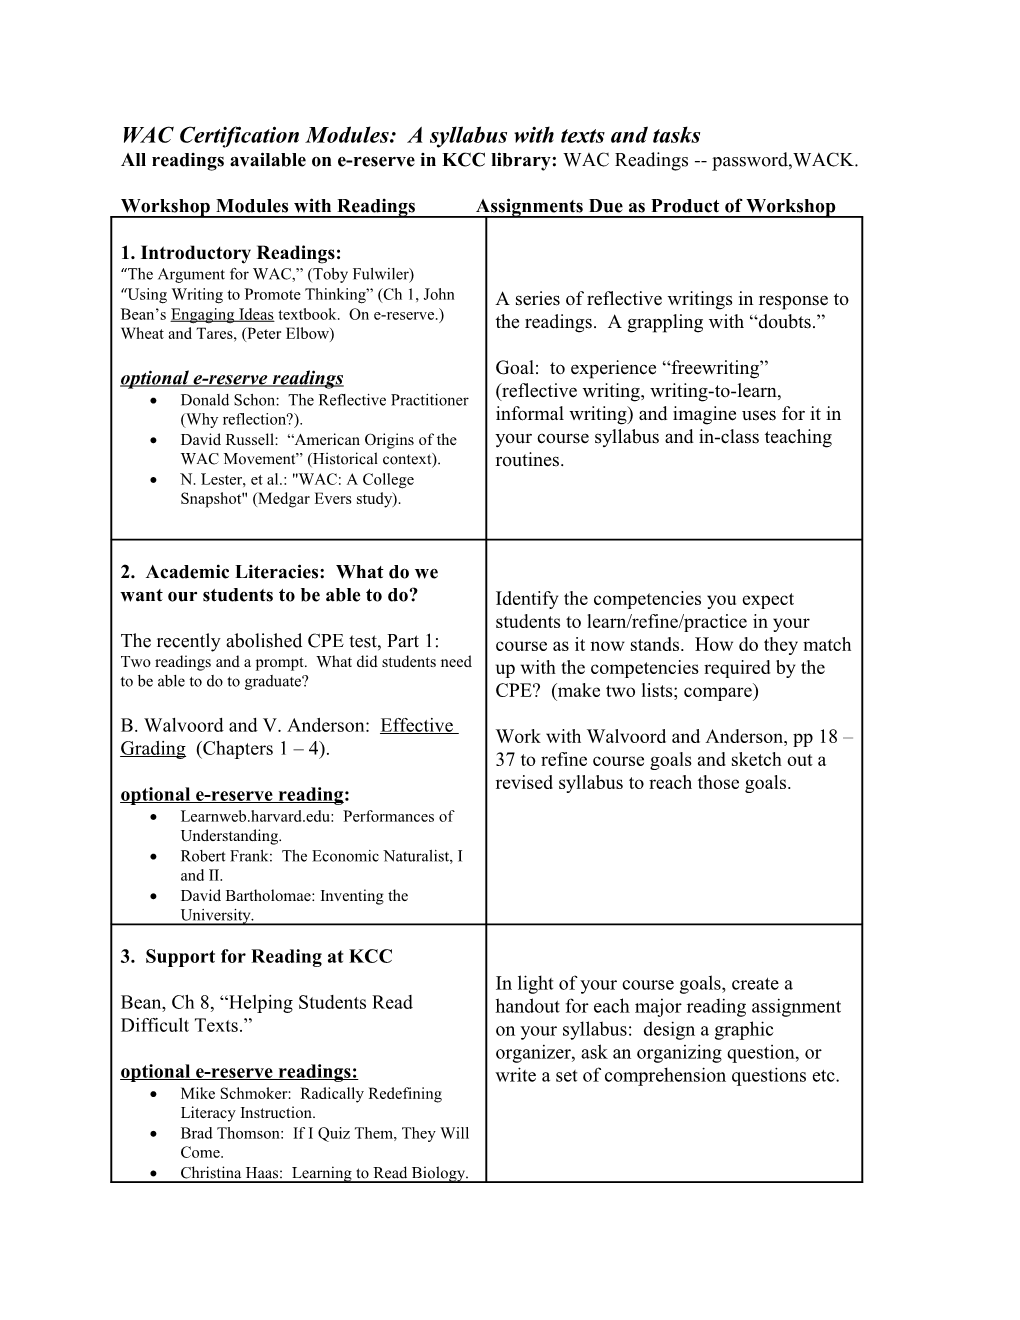 WAC Certification Modules: a Syllabus with Texts and Tasks